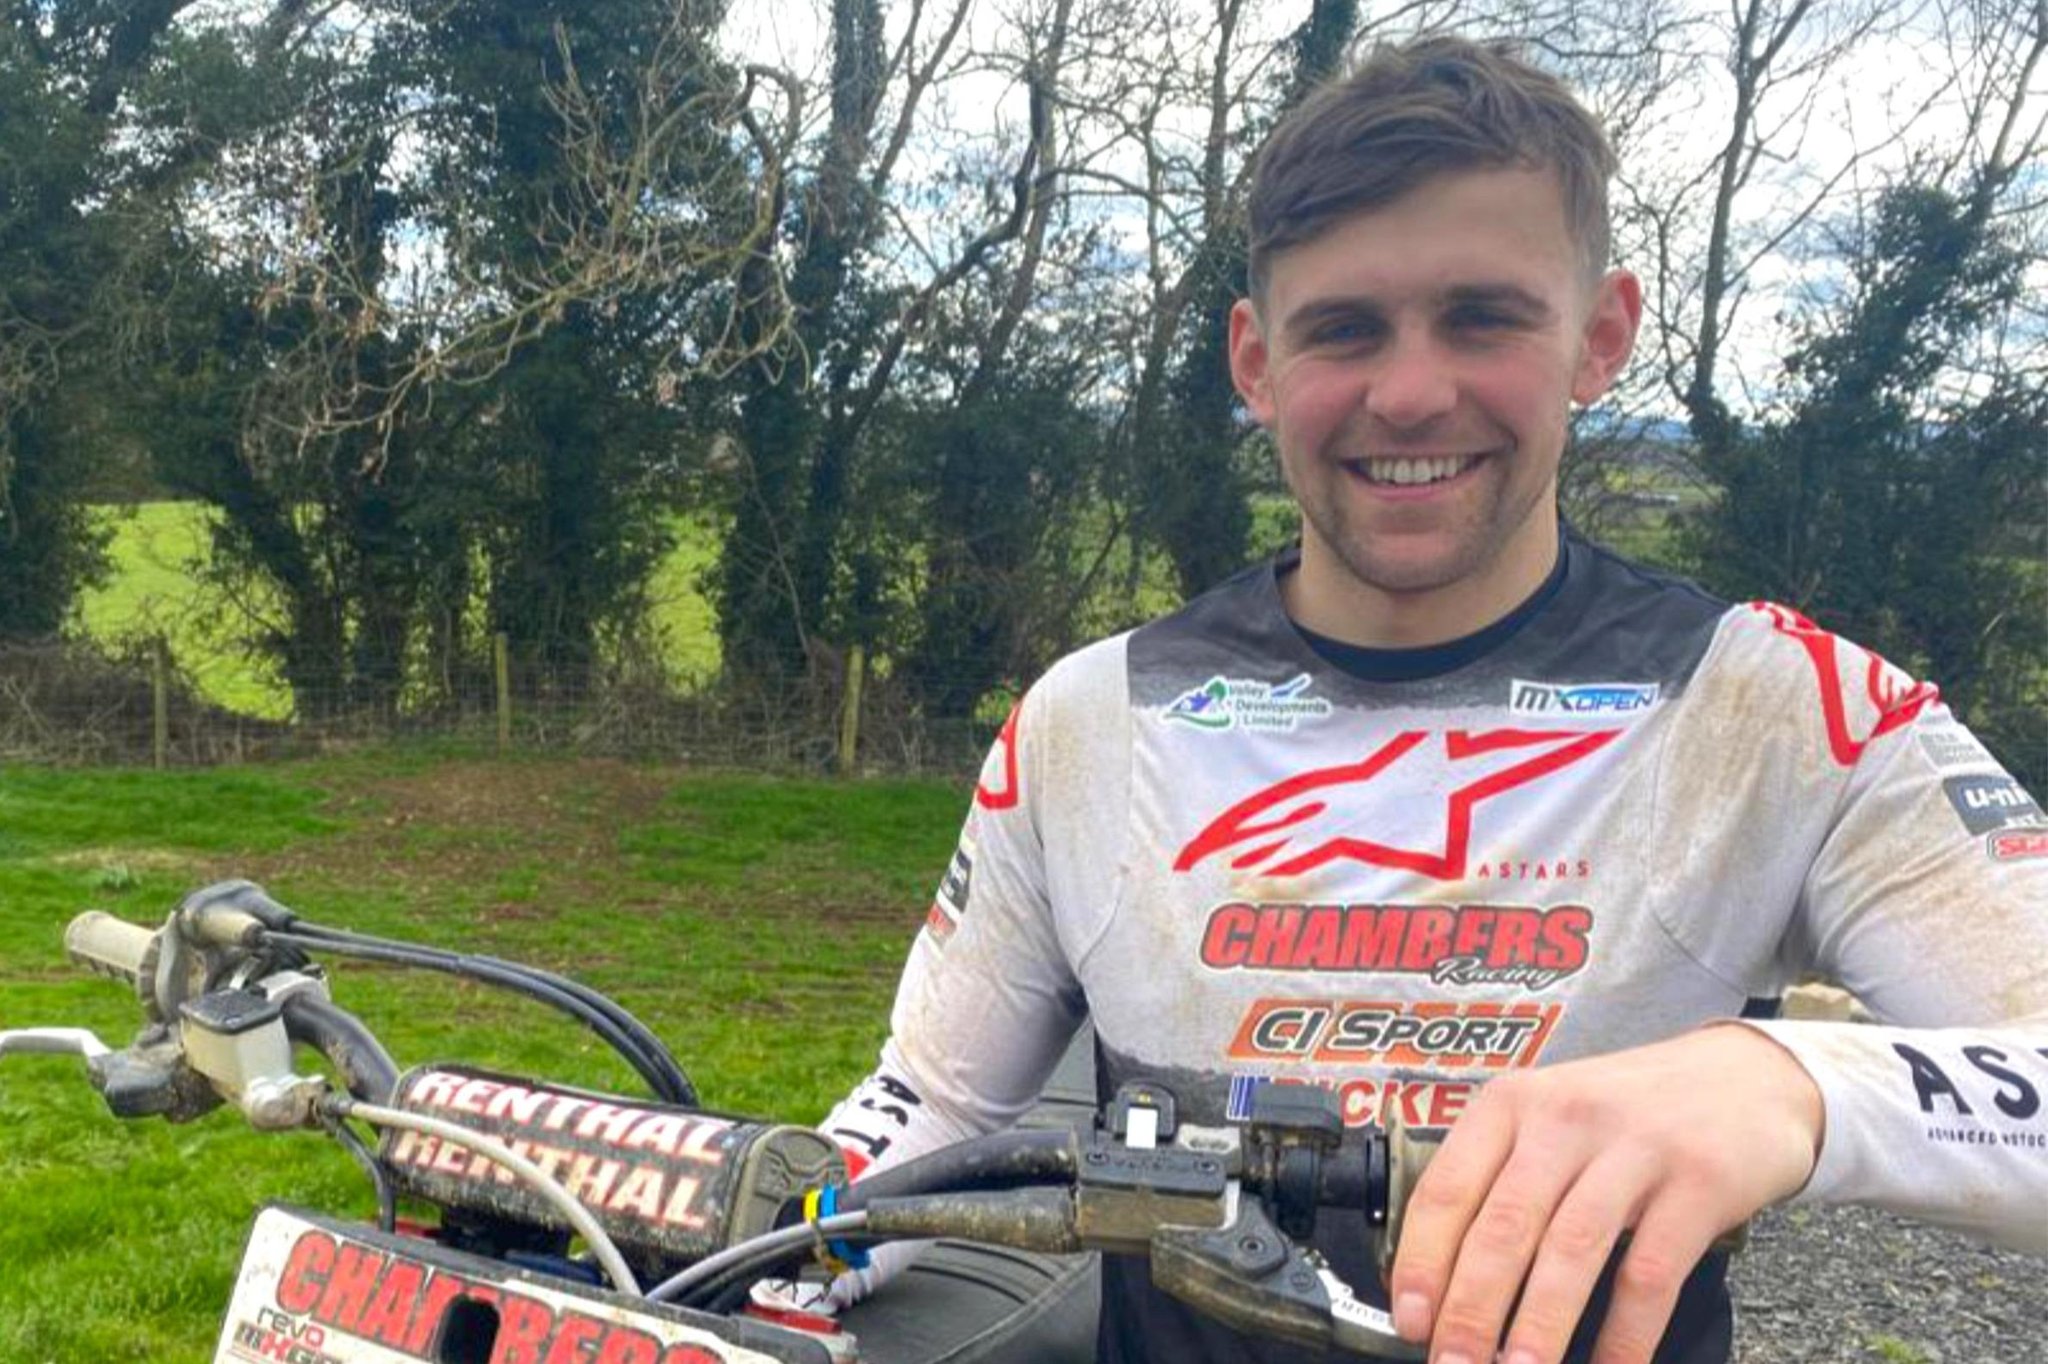 Glenn McCormick comes out on top in Experts MX1 meeting in Claudy